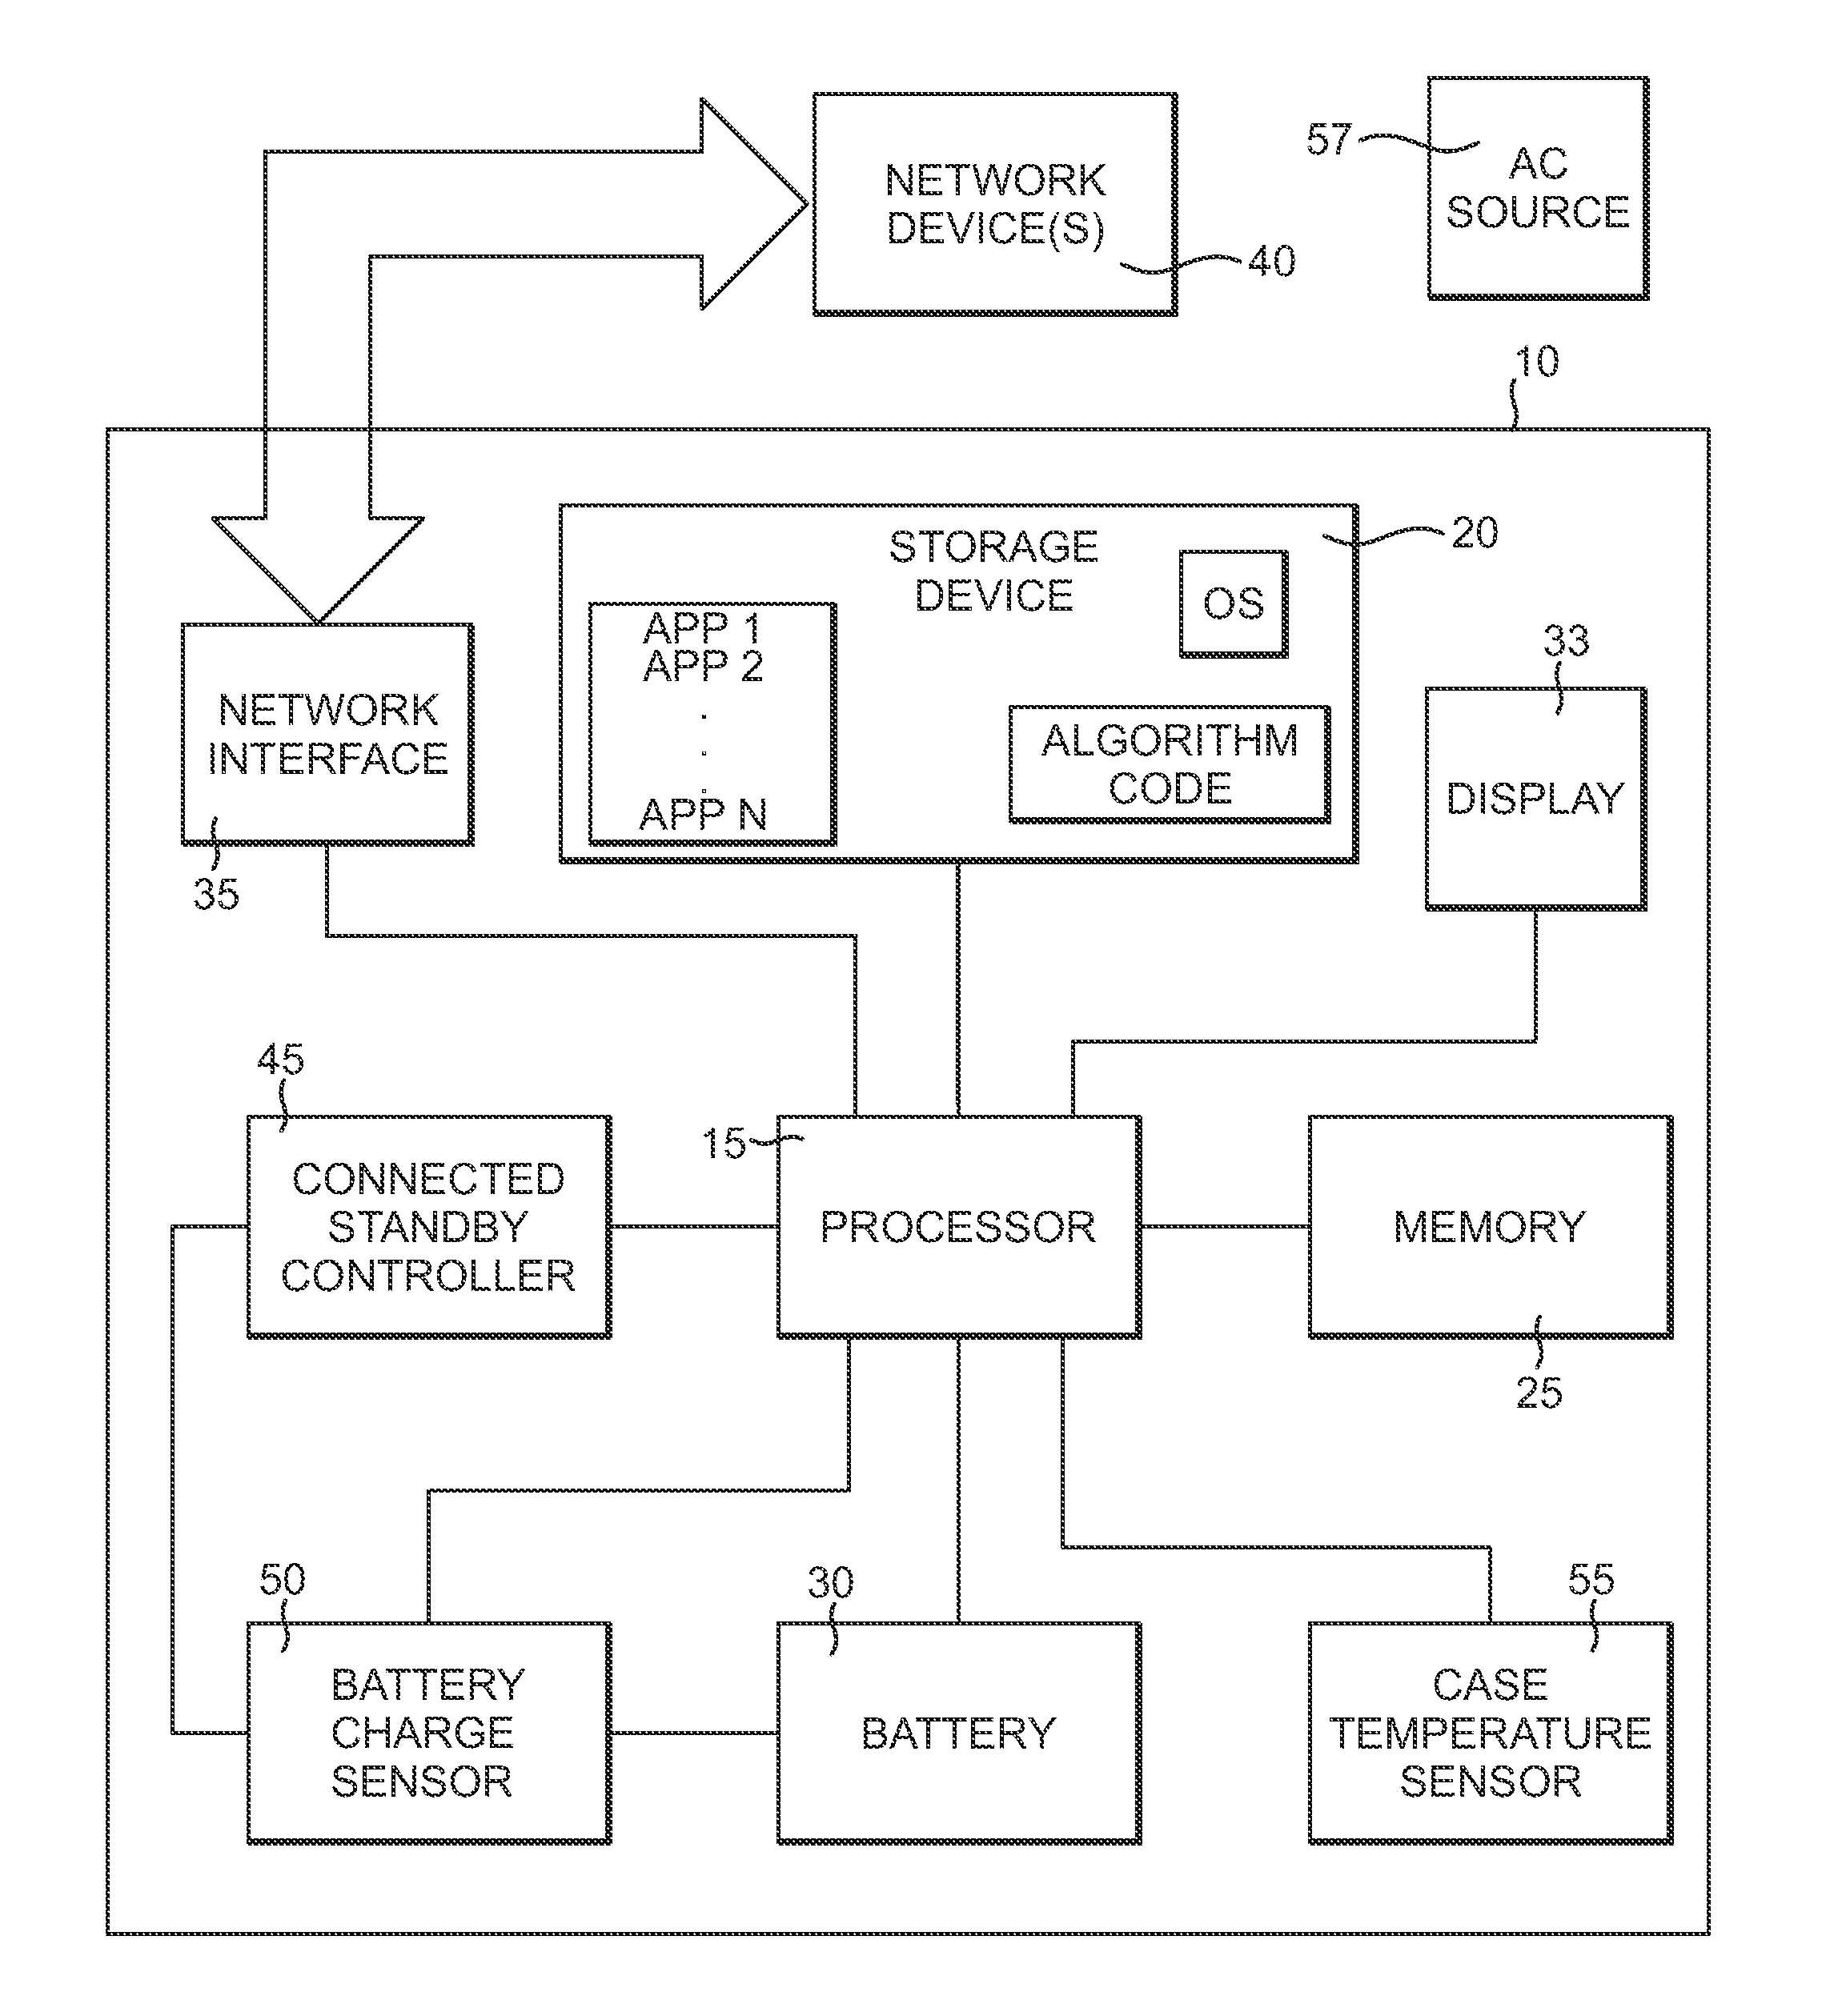 Adaptive connected standby for a computing device